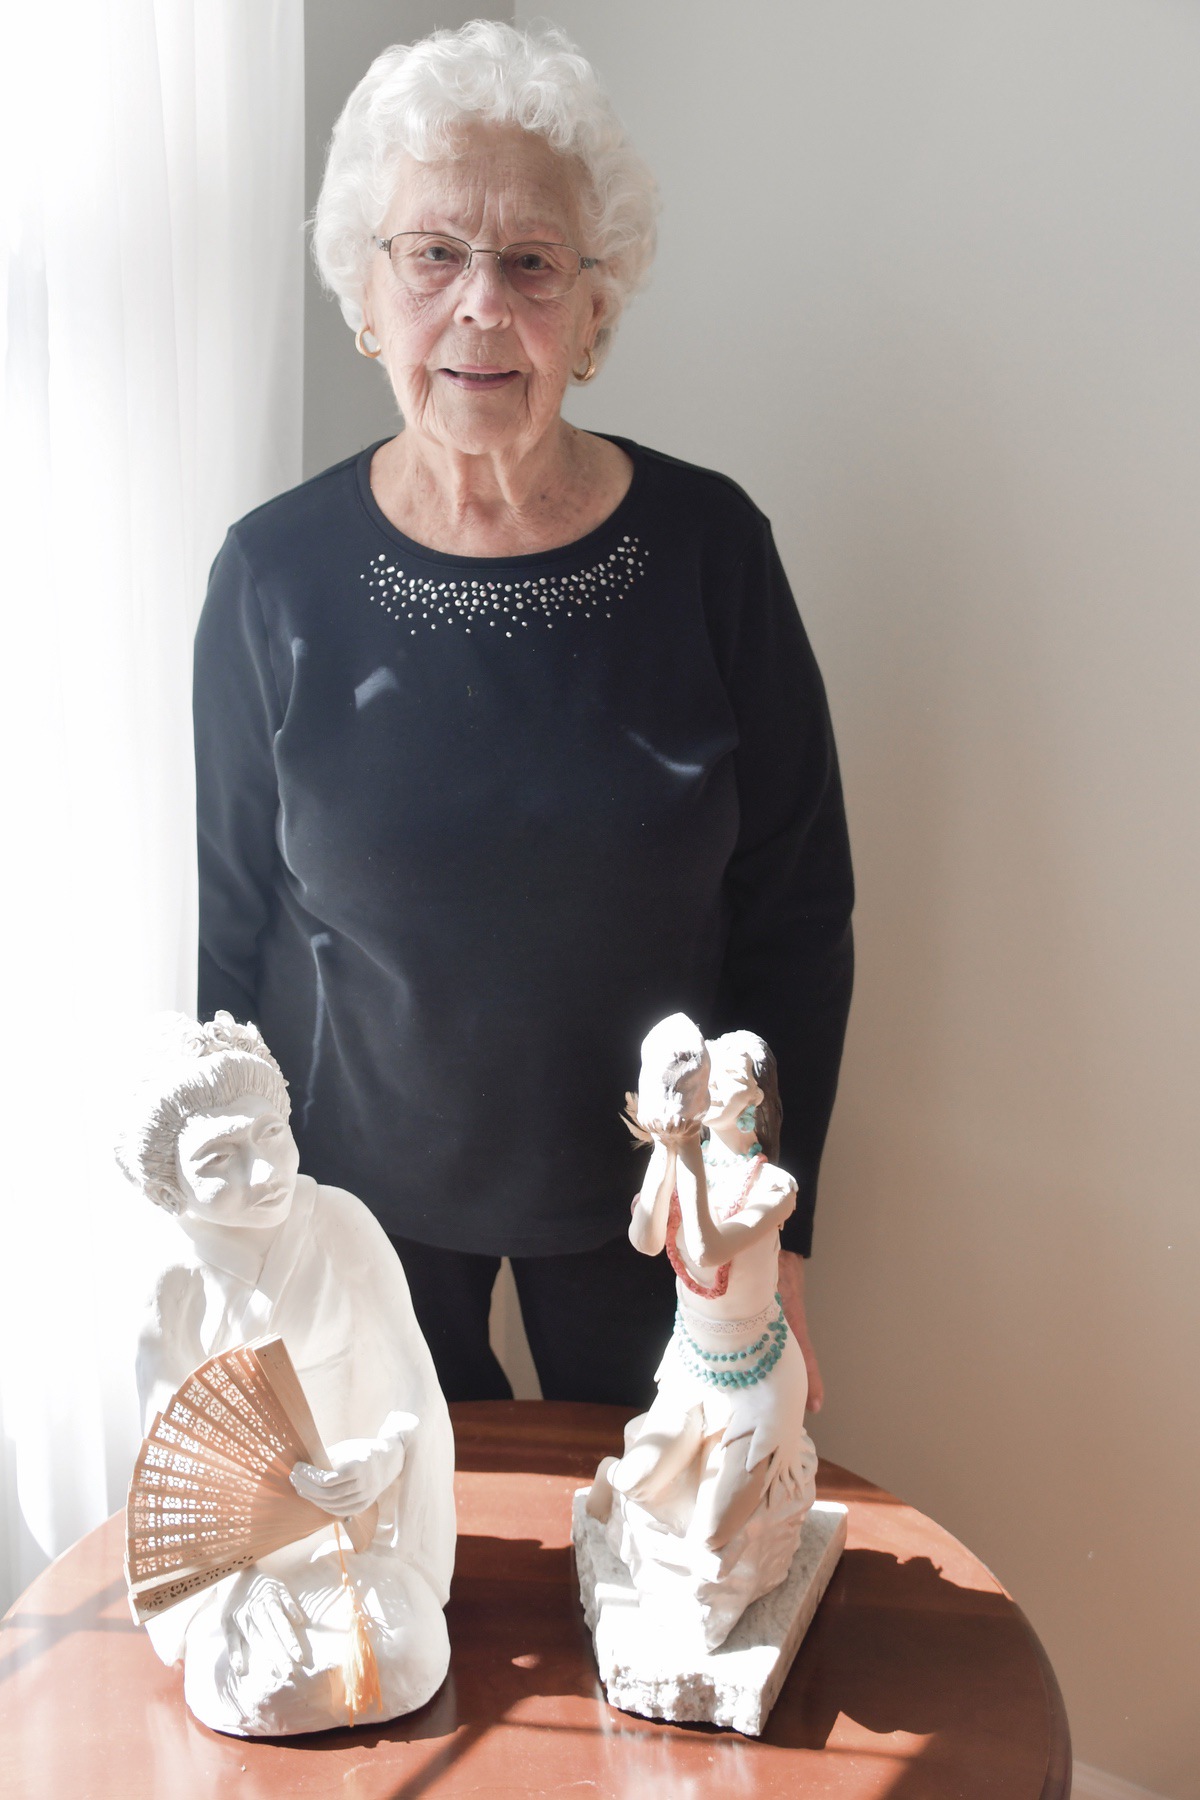 95-year-old Amy Rohr started her artistic endeavors as a cake decorator. Years later, she applied those same skills to sculpting and produces beautiful pieces that can be seen in Prairie Lodge. (Photos by Christine Such/My Sun Day News)